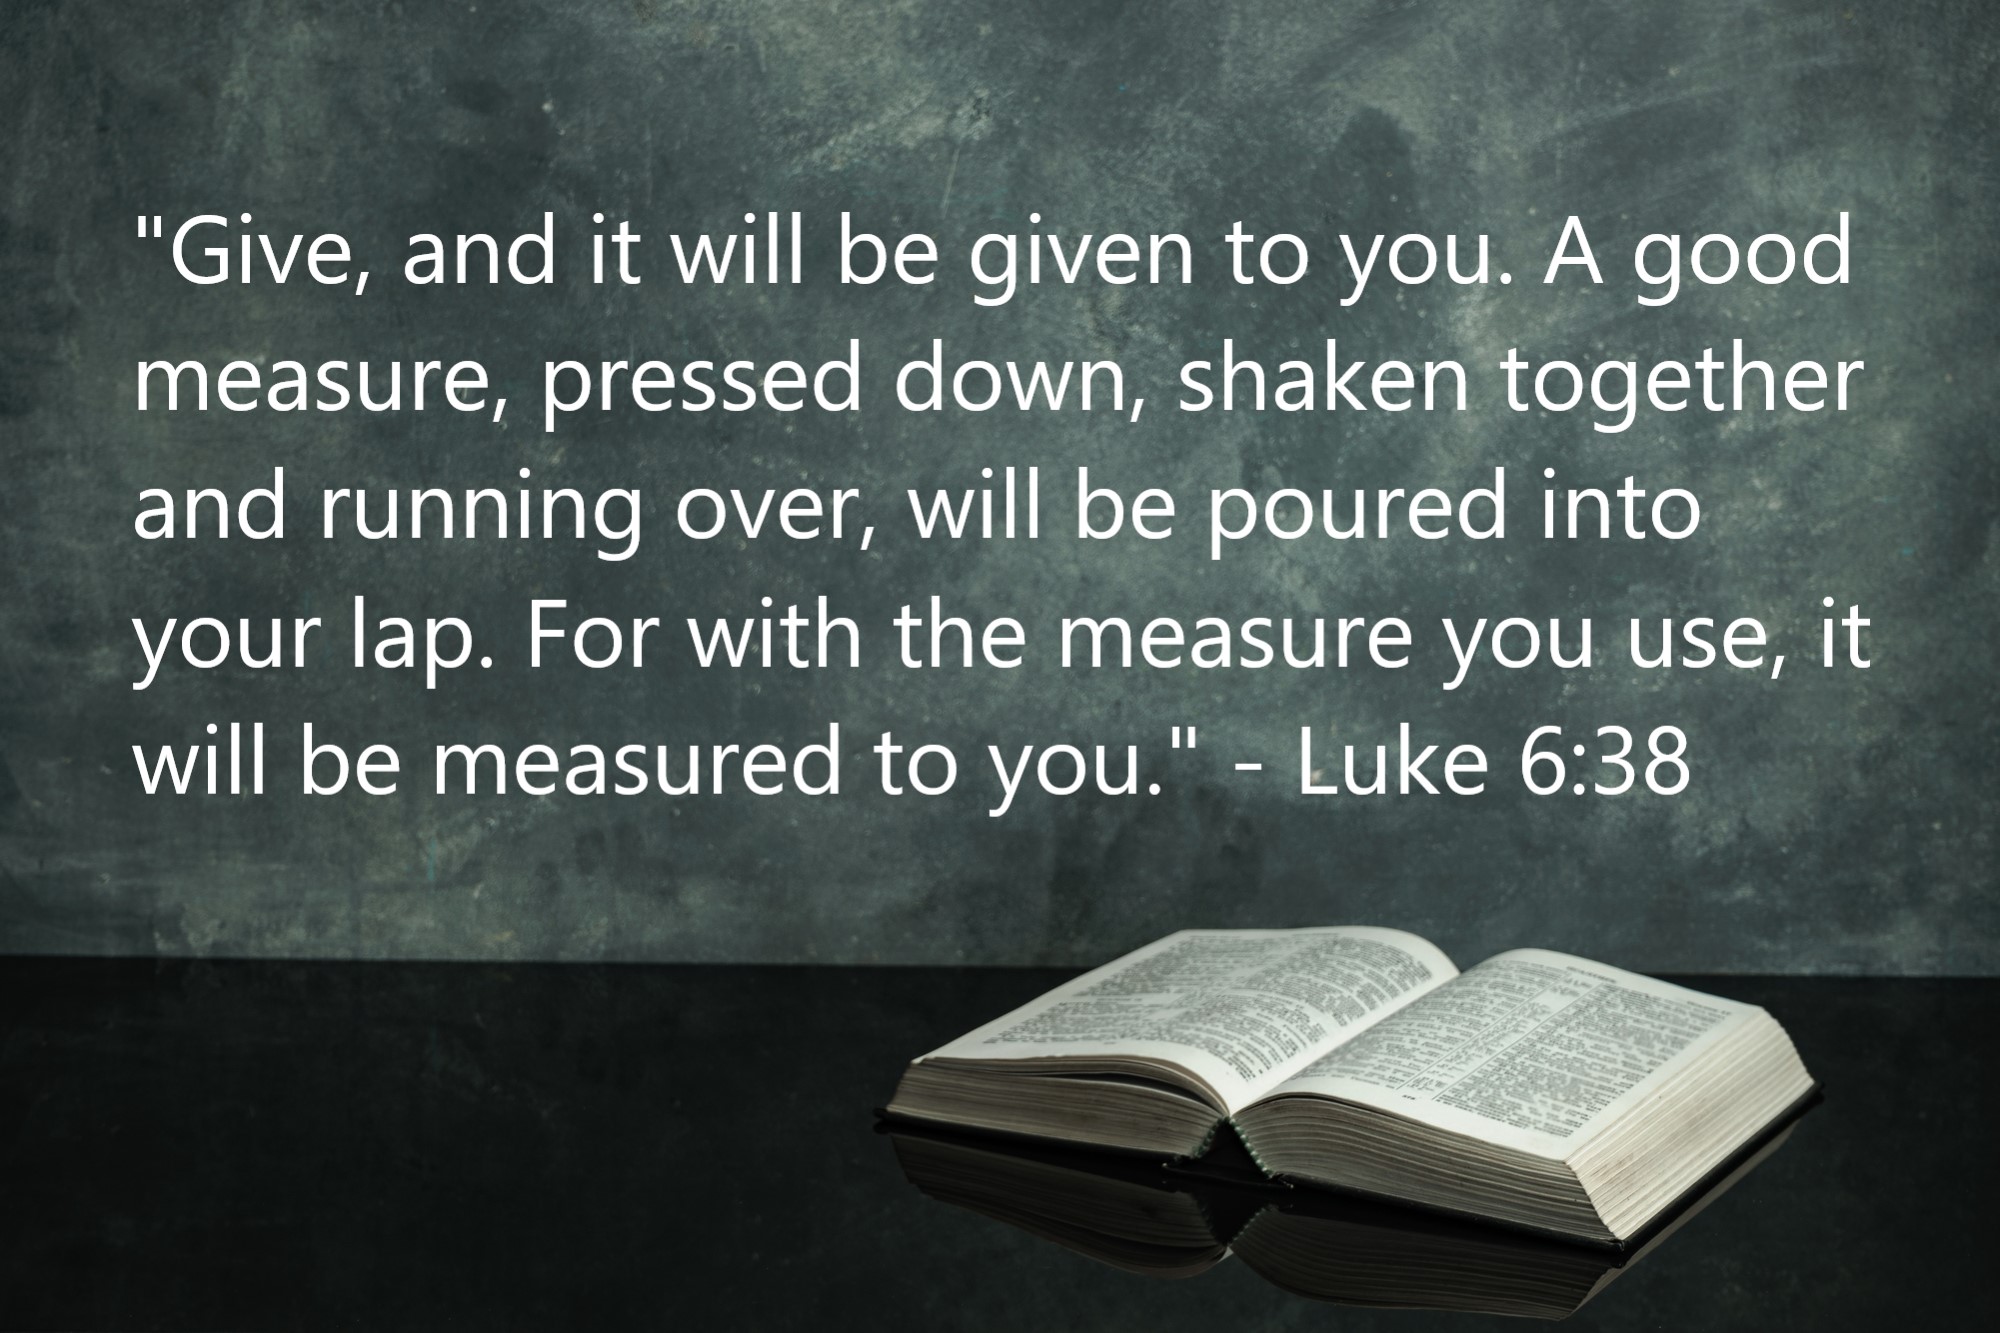  "Give, and it will be given to you. A good measure, pressed down, shaken together and running over, will be poured into your lap. For with the measure you use, it will be measured to you." - Luke 6:38